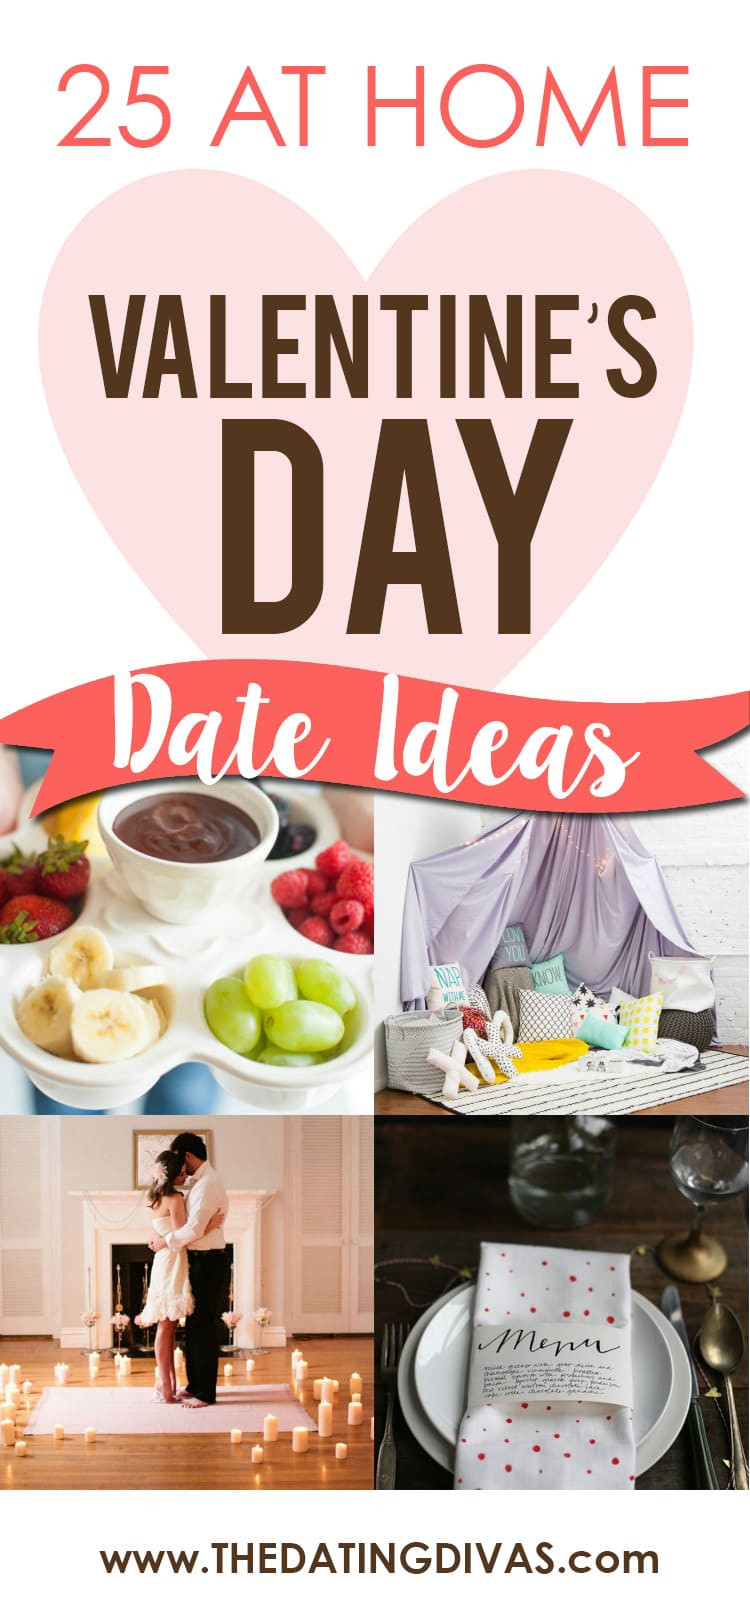 At Home Valentines Day Ideas
 The Top 76 Valentine s Day Date Ideas The Dating Divas